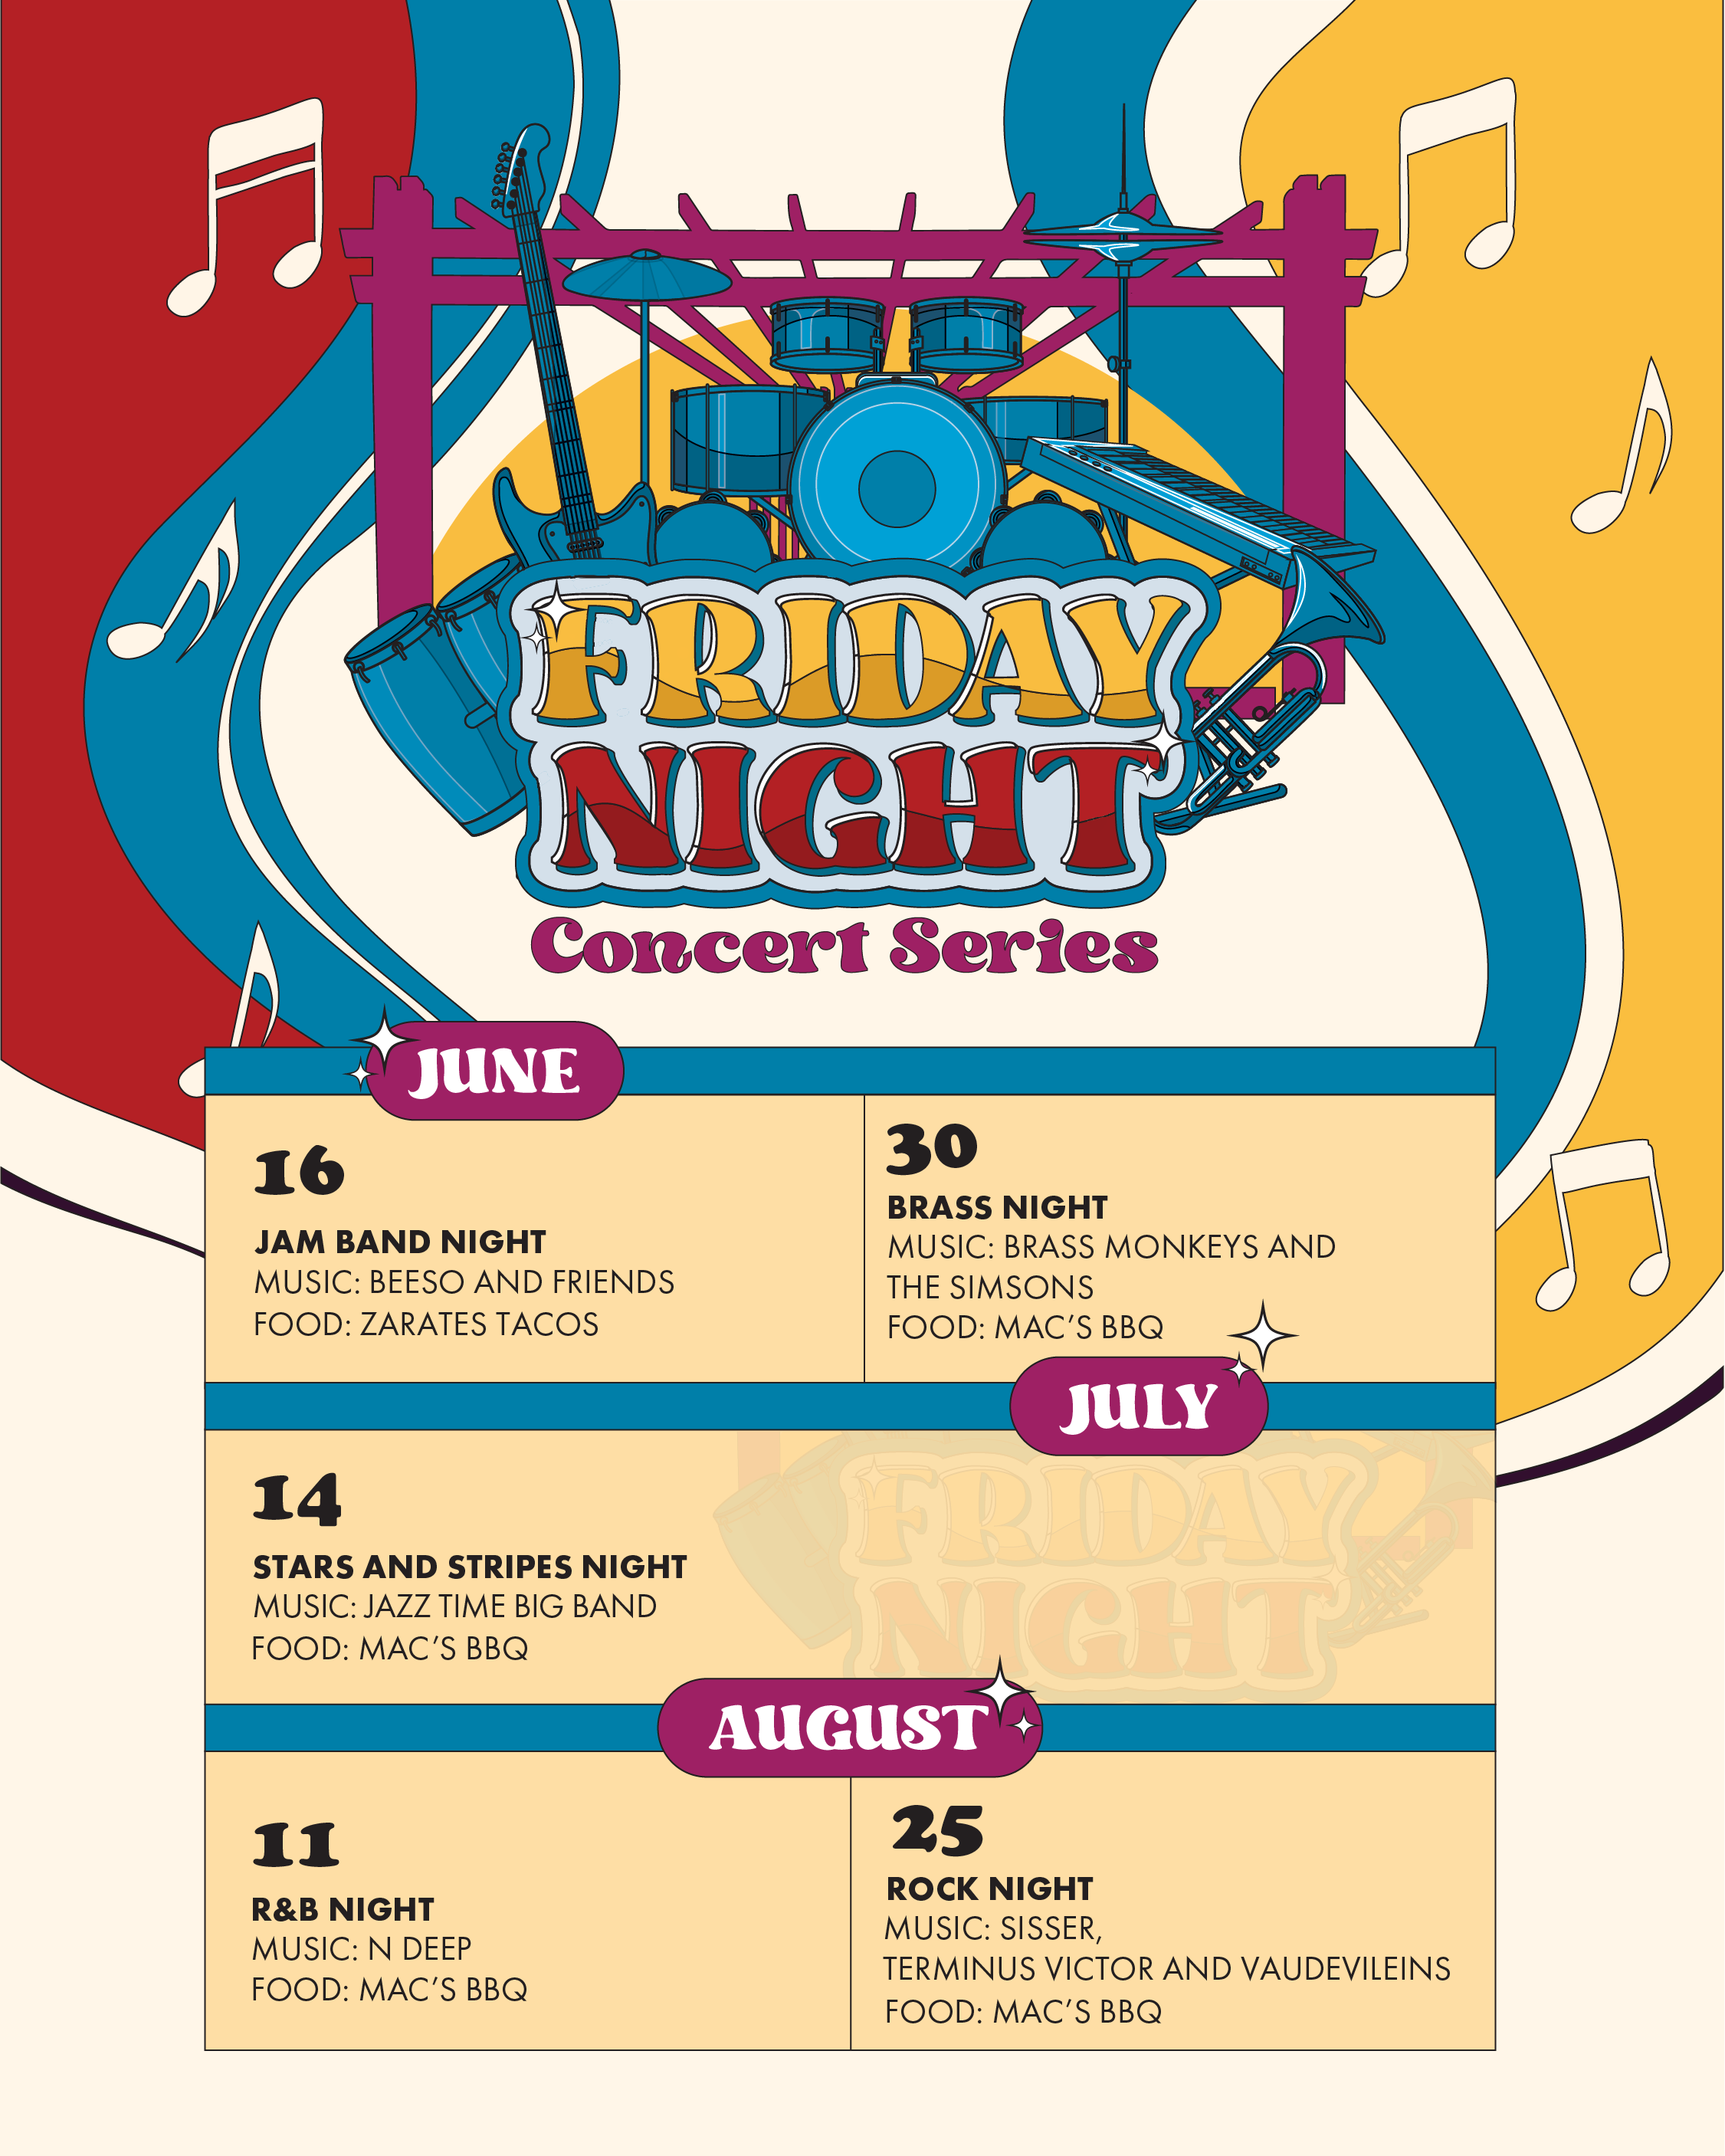 Friday Night Concert Series in Downtown Kankakee